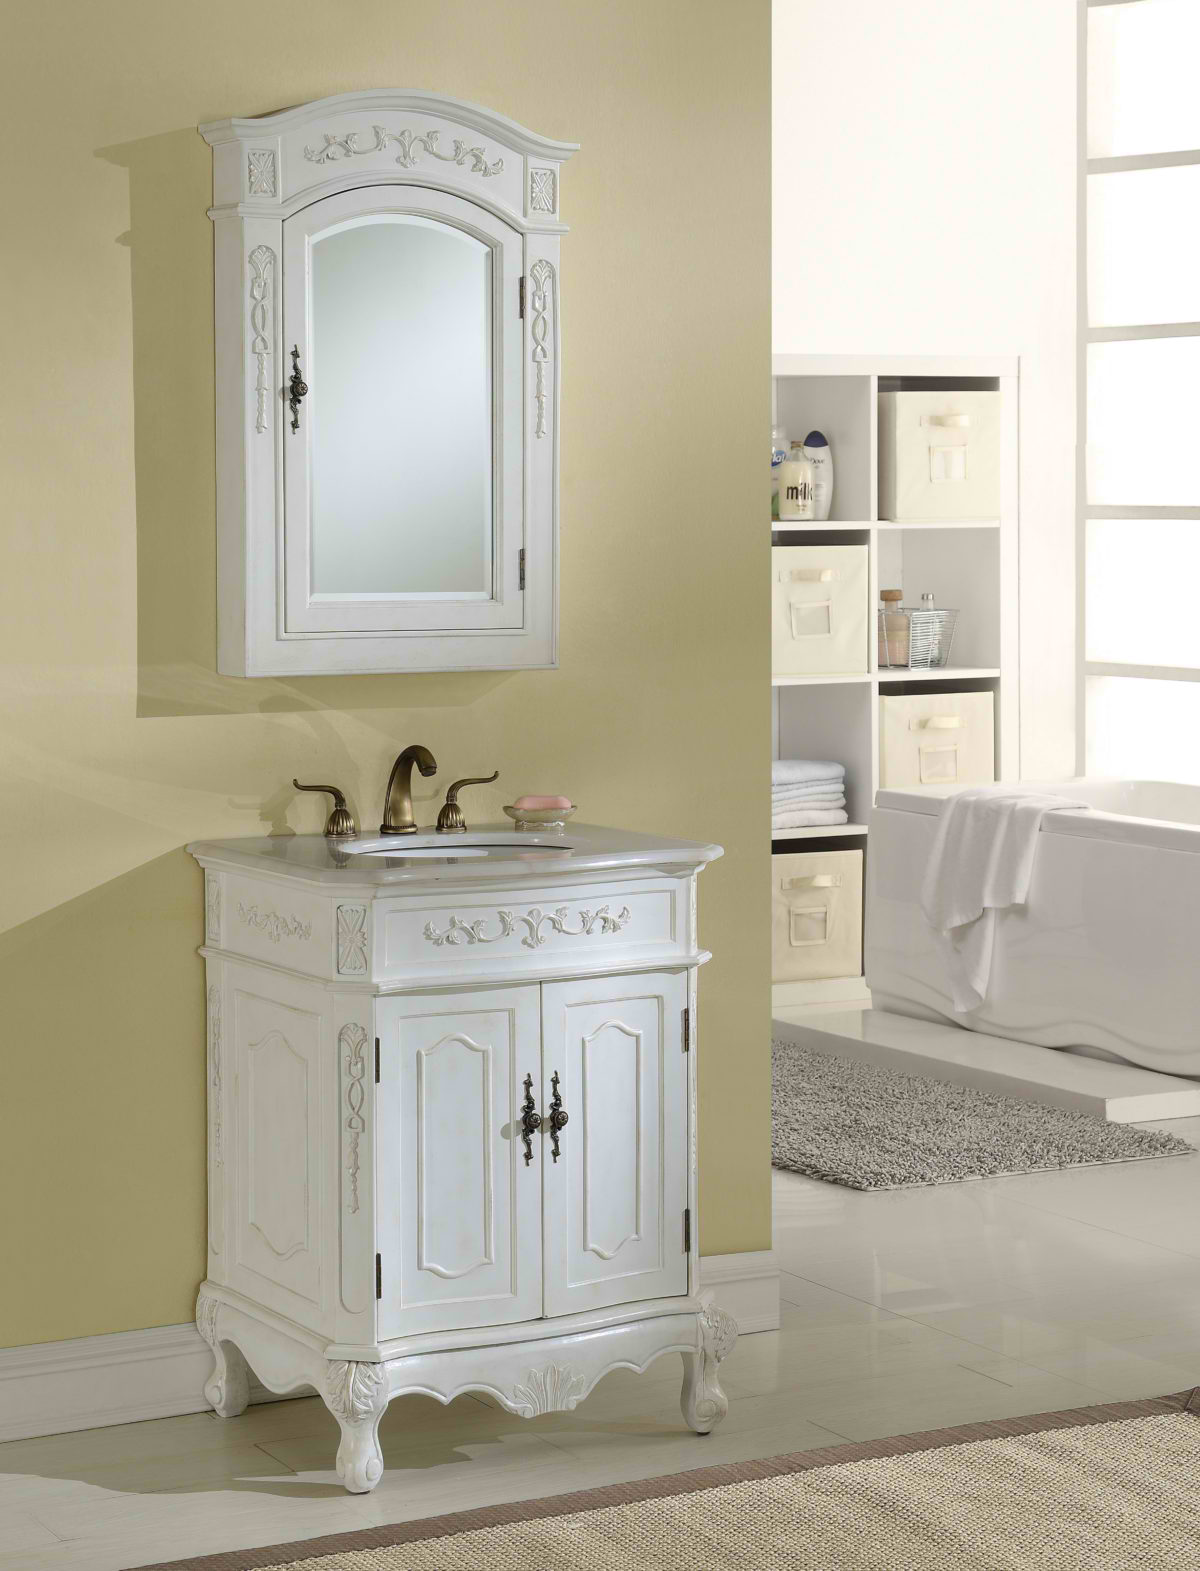 27" Antique White Finish Vanity with Mirror, Med Cab, and Linen Cabinet Options